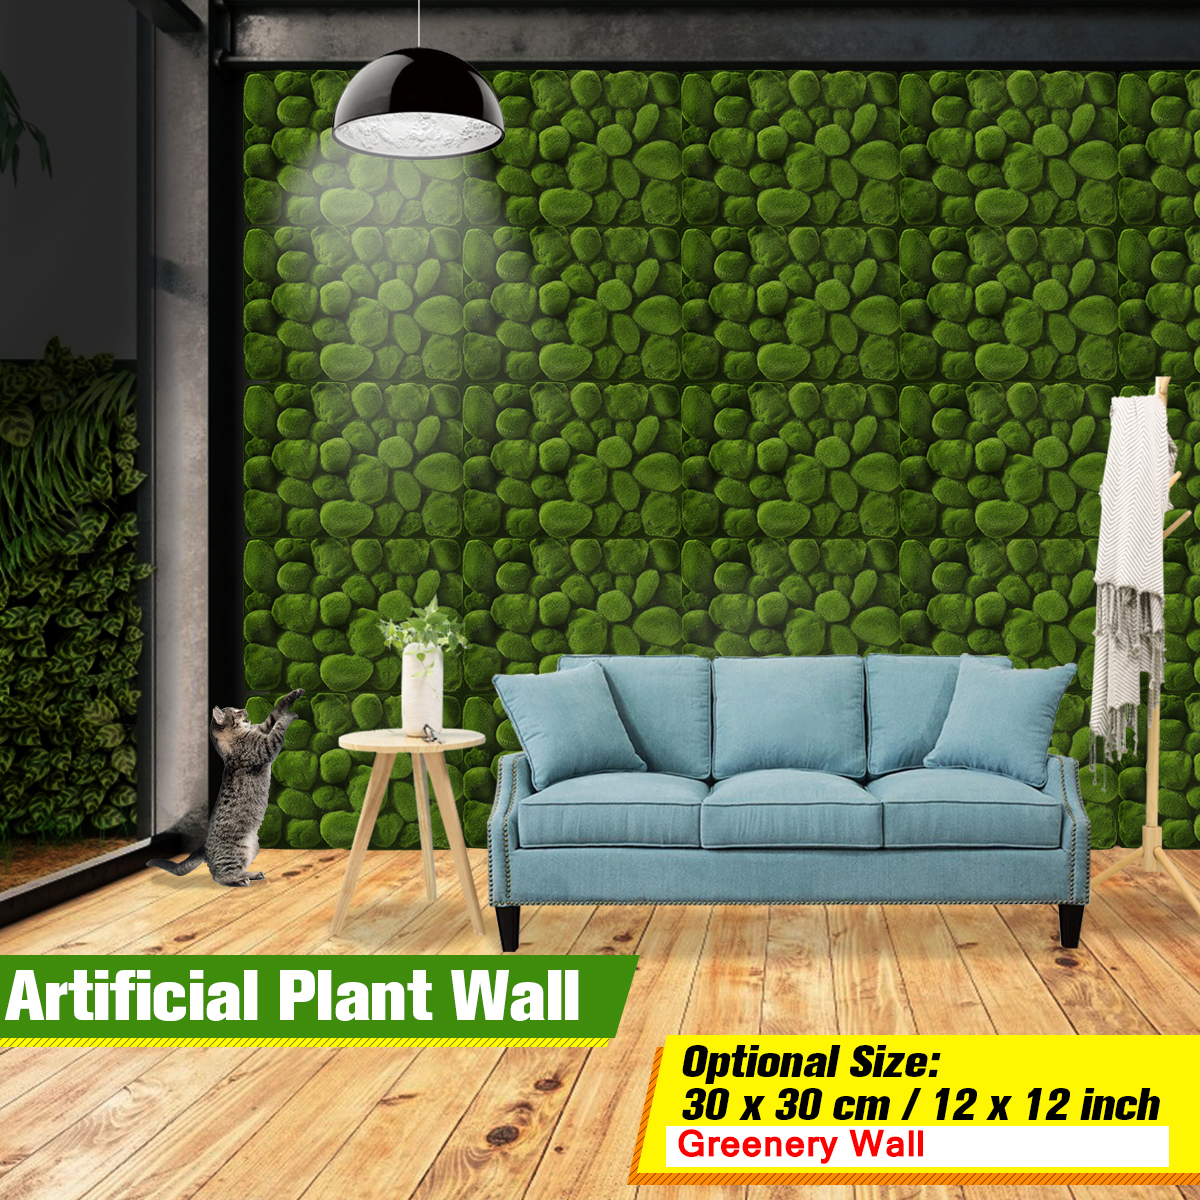 Artificial-Topiary-Hedges-Panels-Plastic-Faux-Shrubs-Fence-Mat-Greenery-Wall-Backdrop-Decor-Garden-P-1955507-1